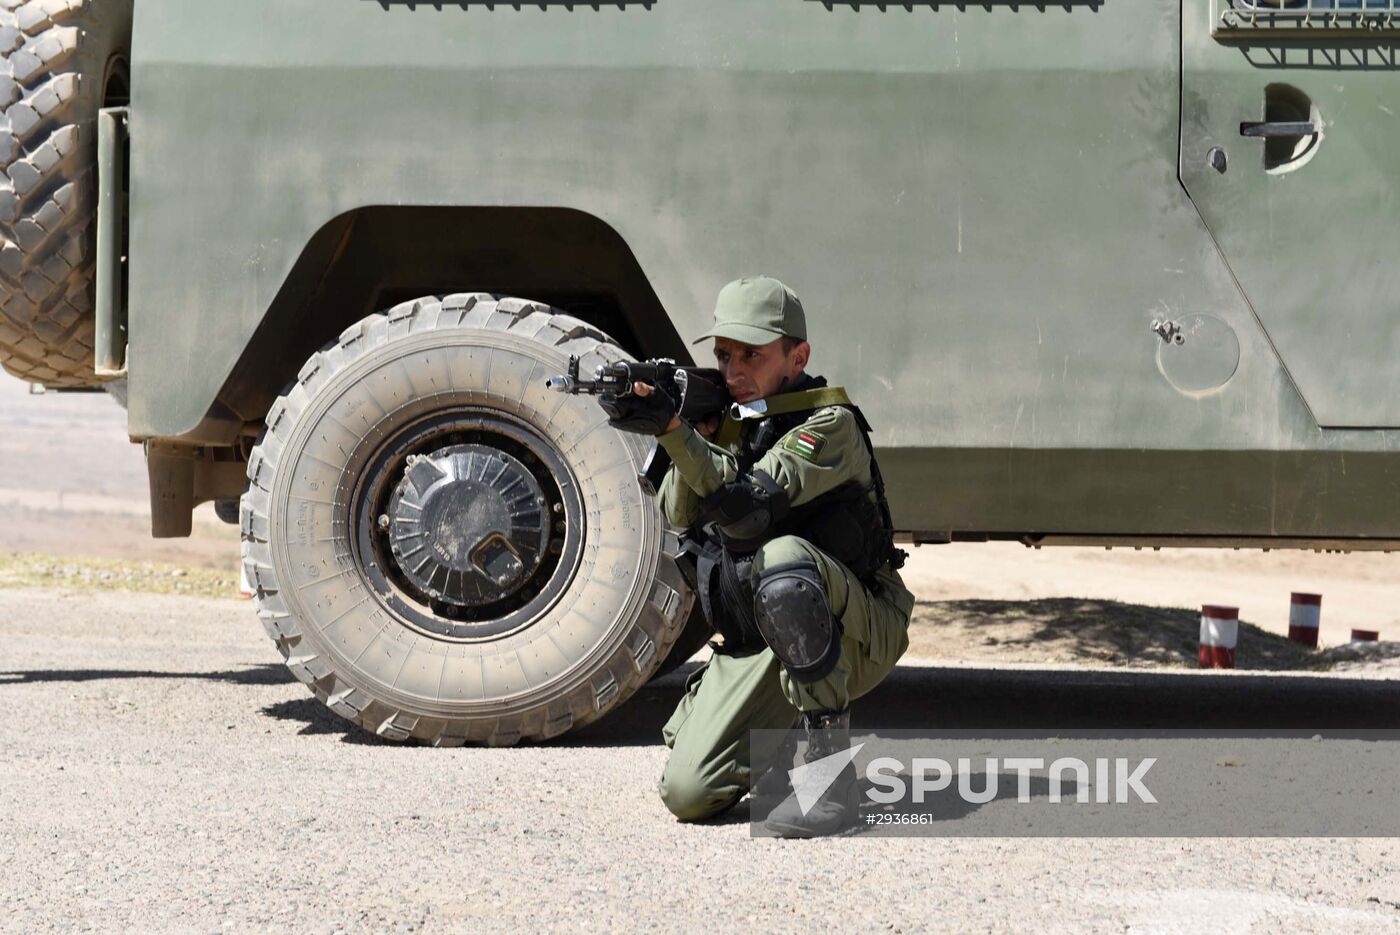 Сombined exercise of Russian military post and military forces of Tajikistan